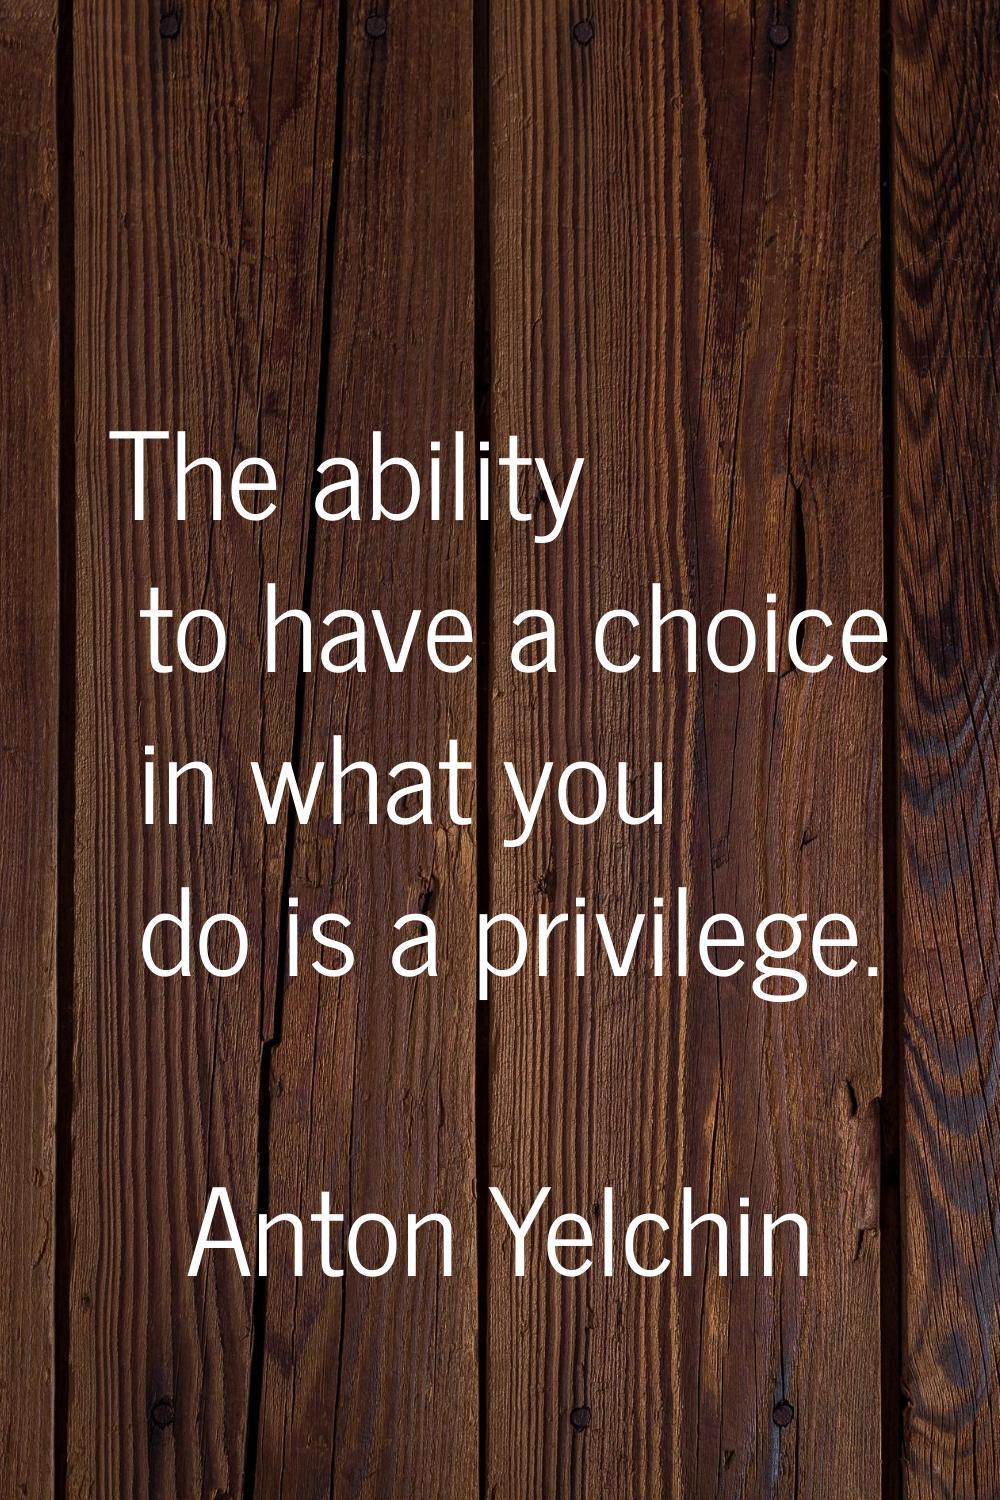 The ability to have a choice in what you do is a privilege.